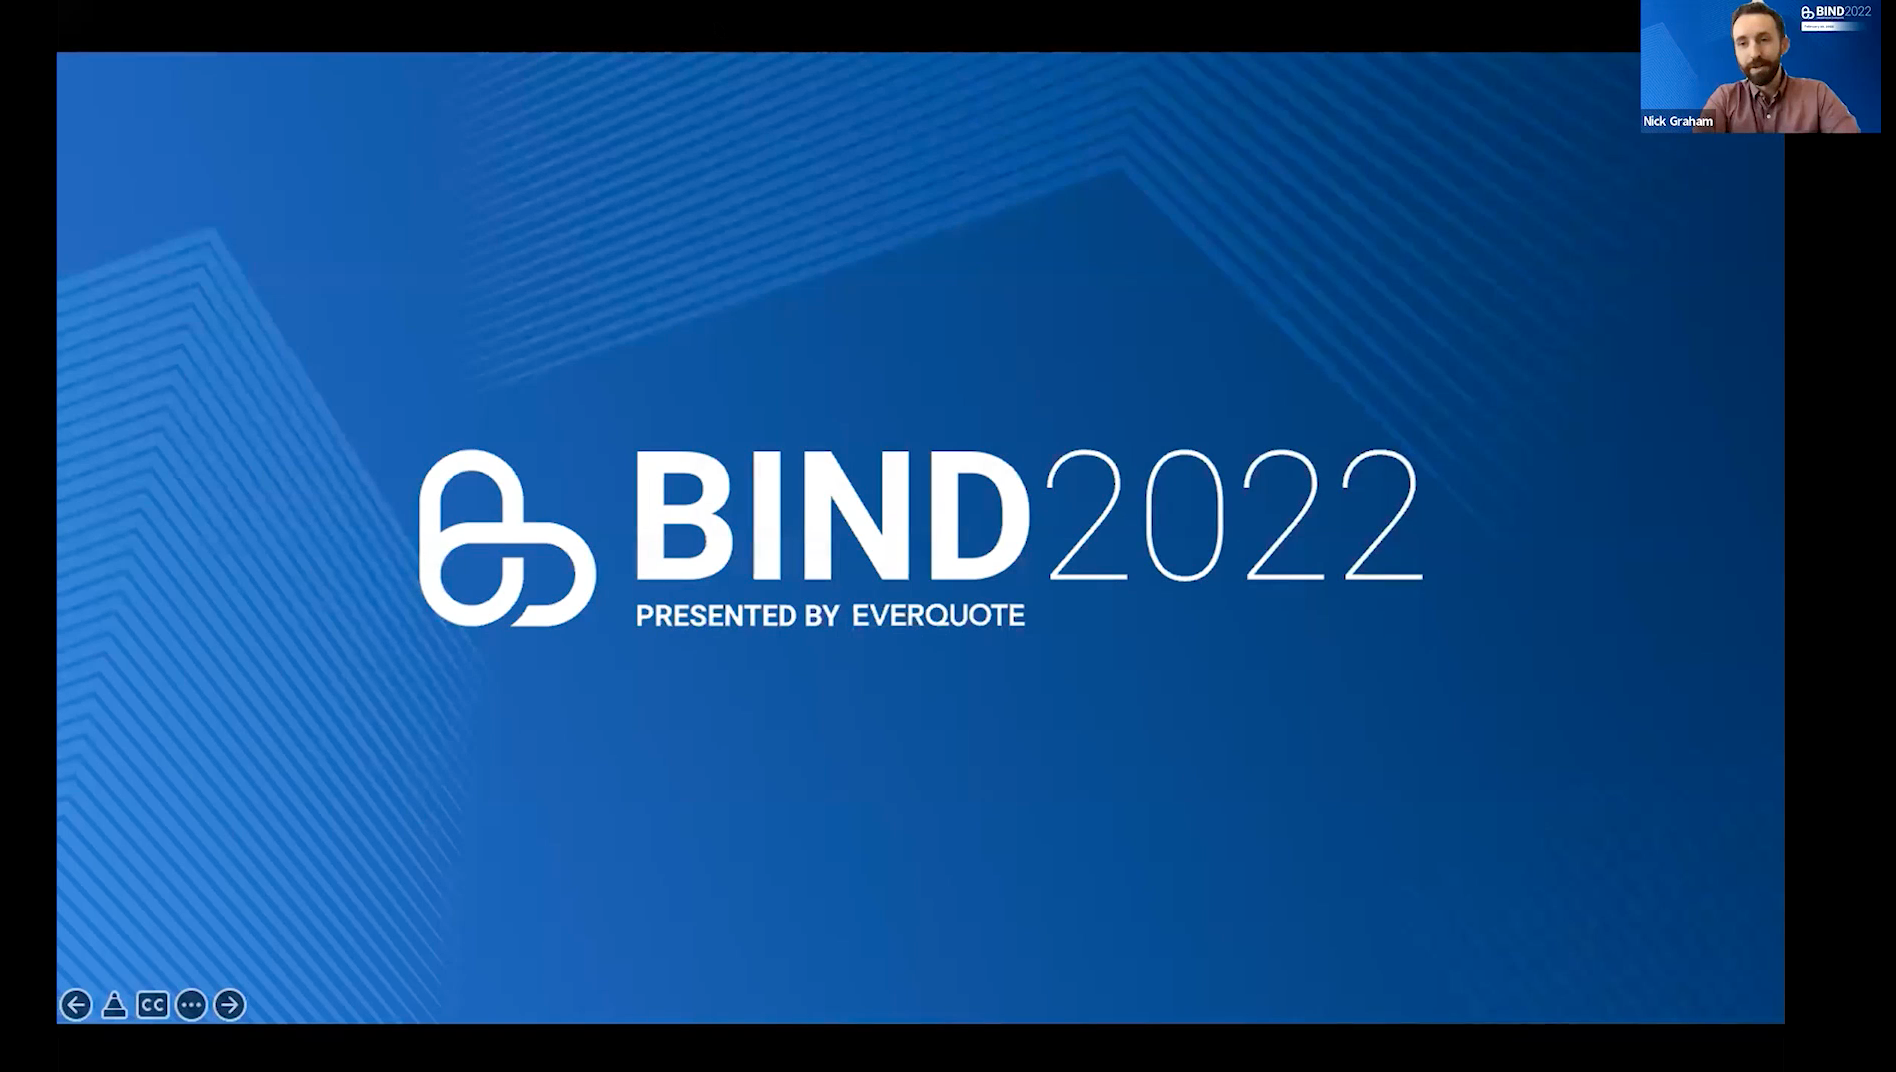 BIND 2022 Highlights: EverQuote's Annual Virtual Conference